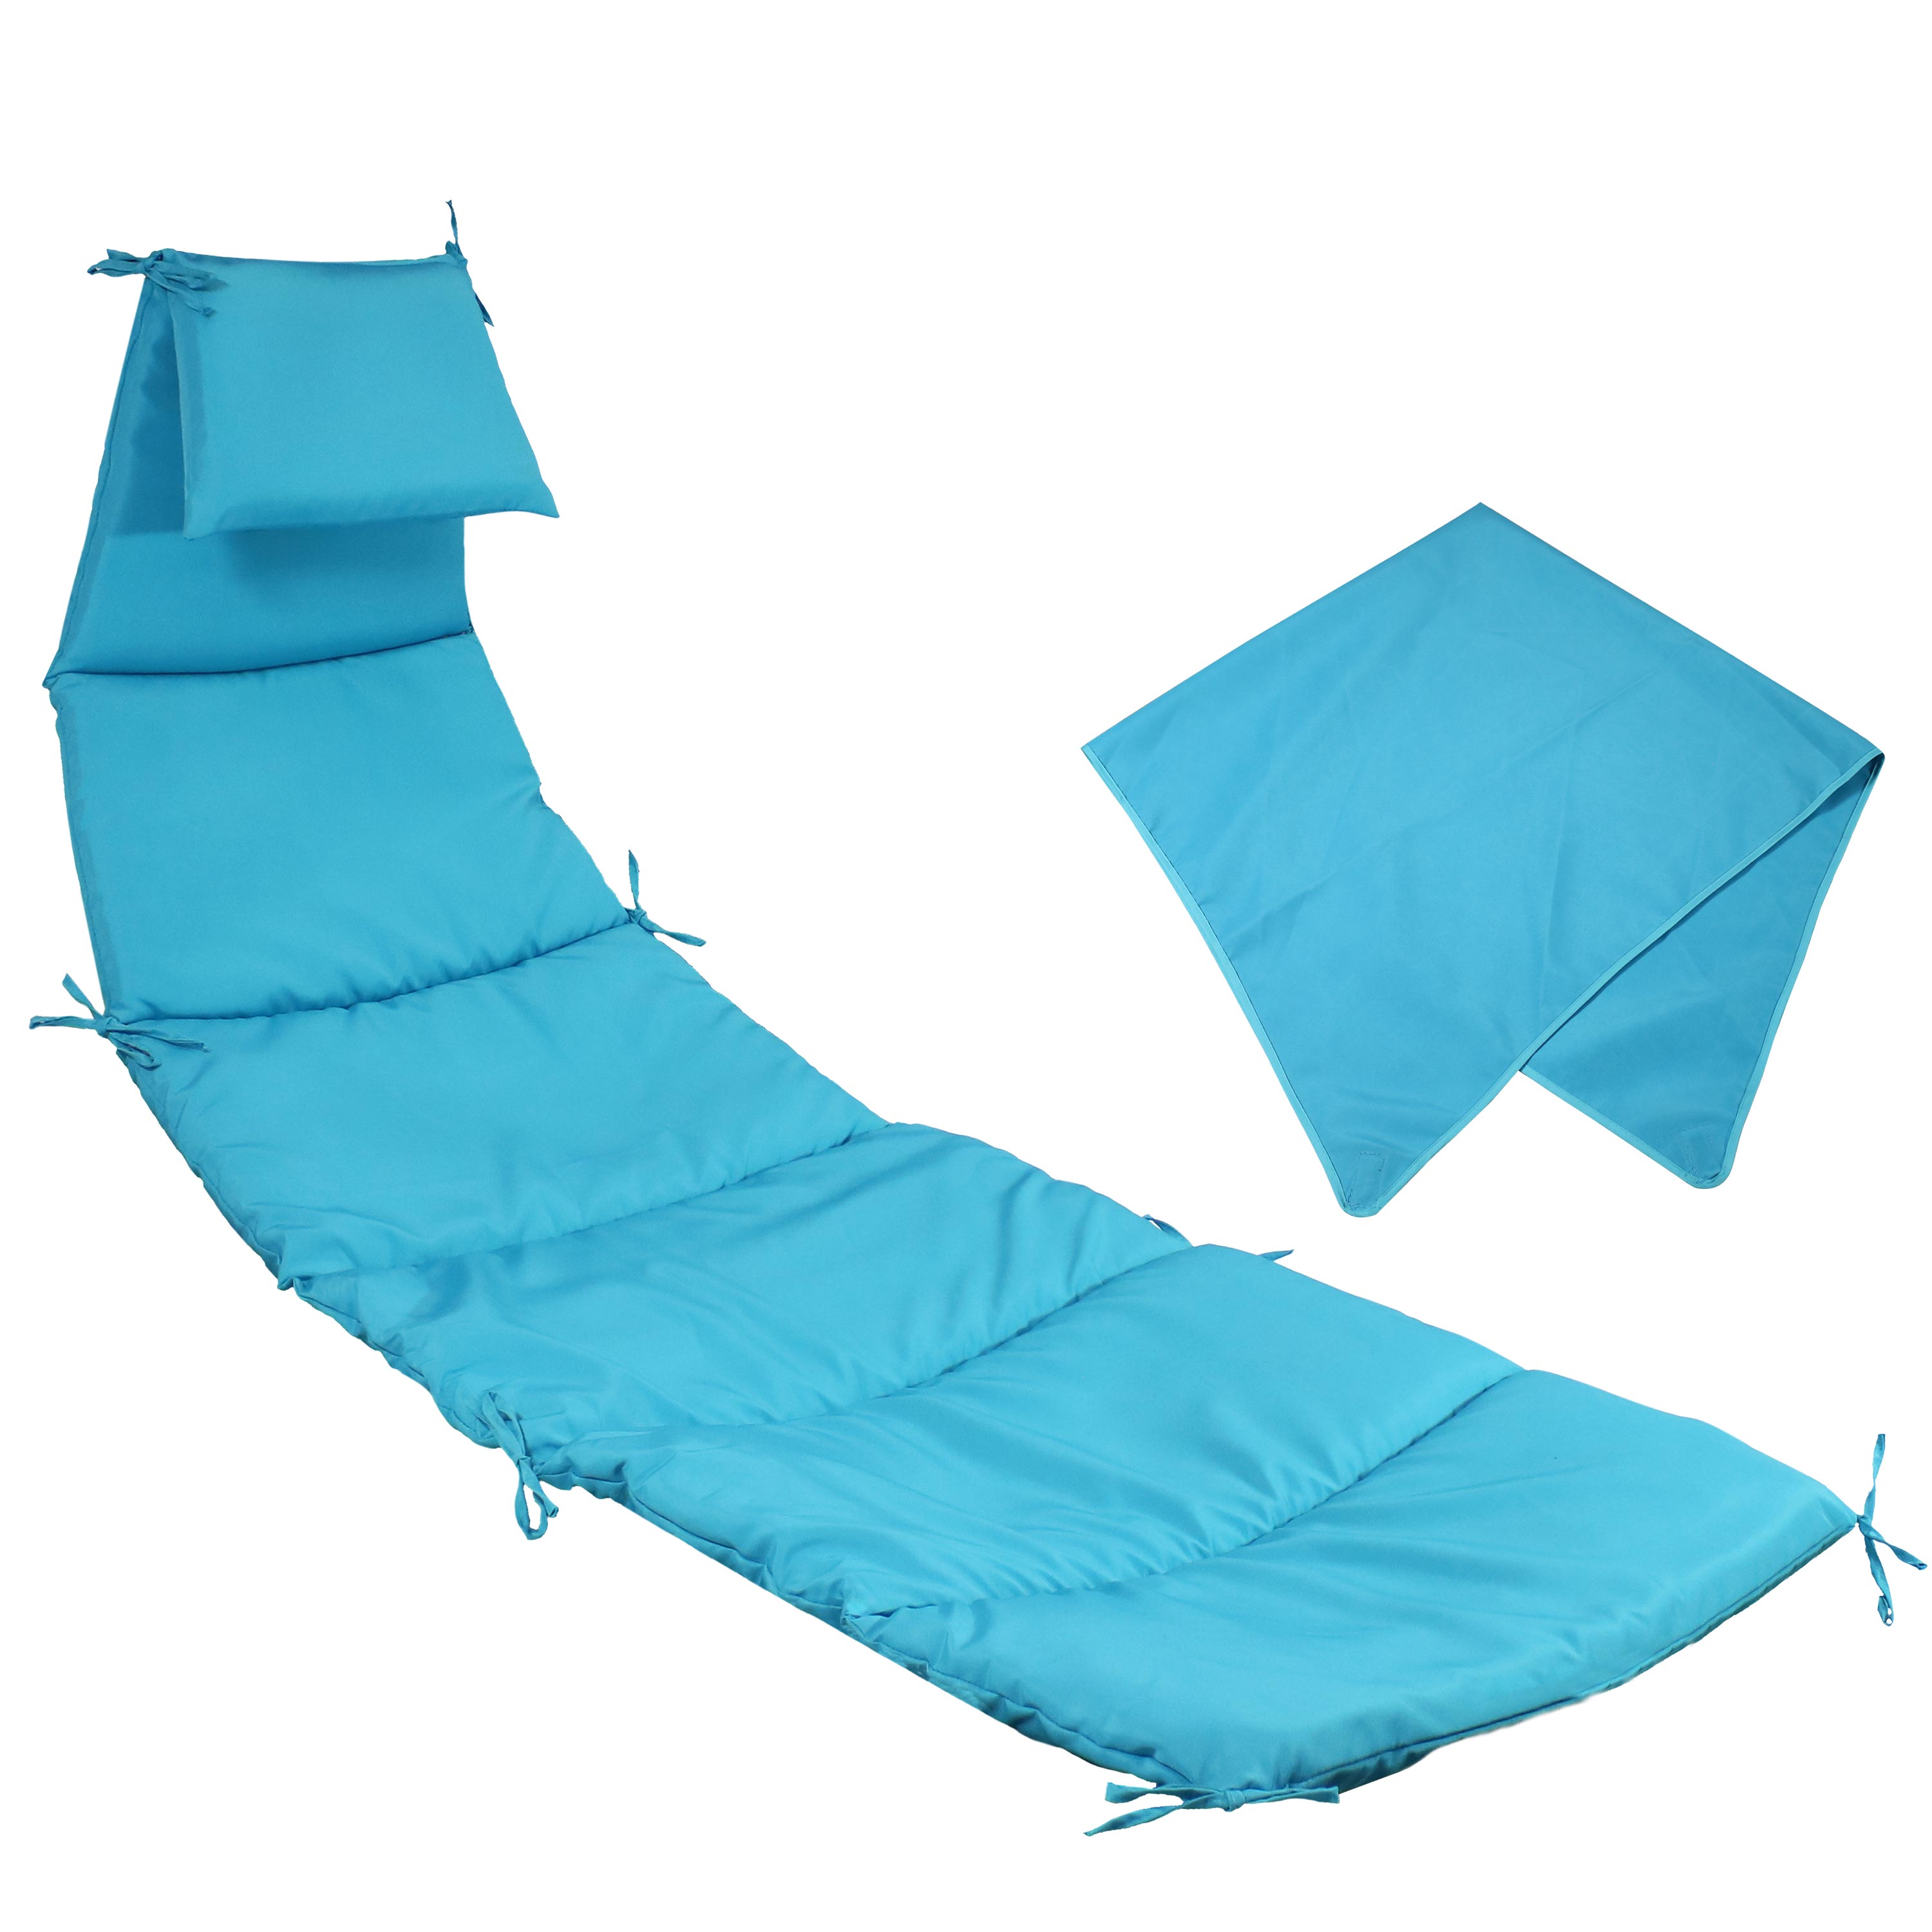 Sunnydaze Hanging Lounge Chair Replacement Cushion and Umbrella, Teal